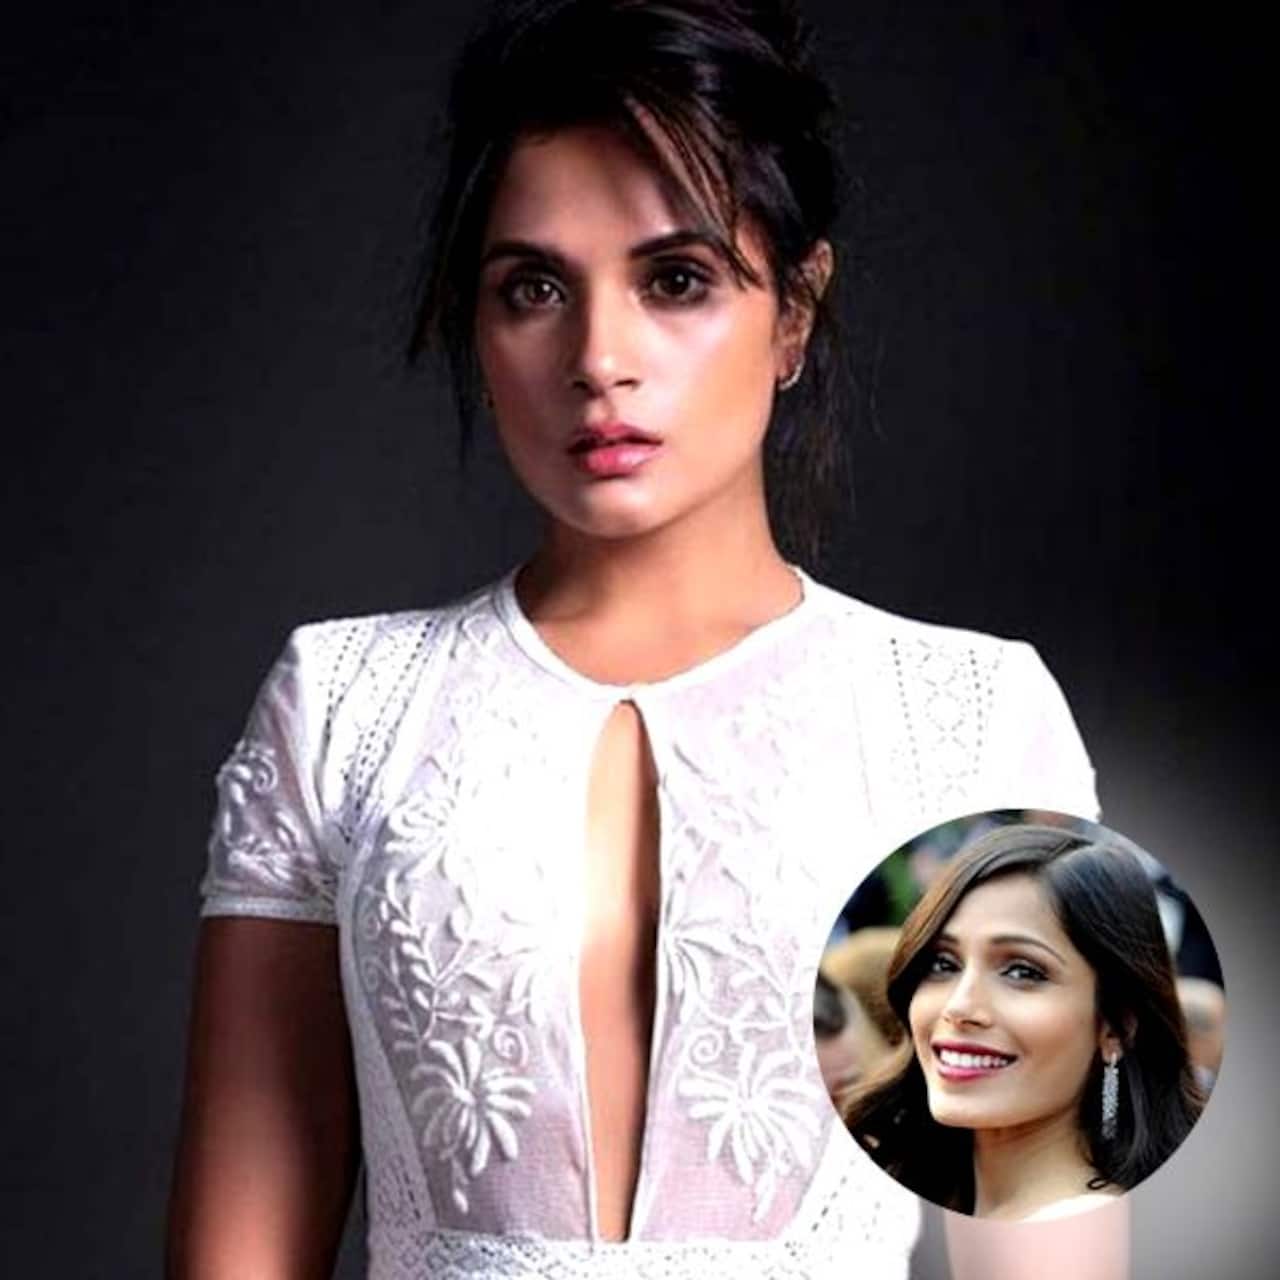 Exclusive! 'Frieda Pinto's mother couldn't recognise her in Love Sonia,' reveals Richa Chadha